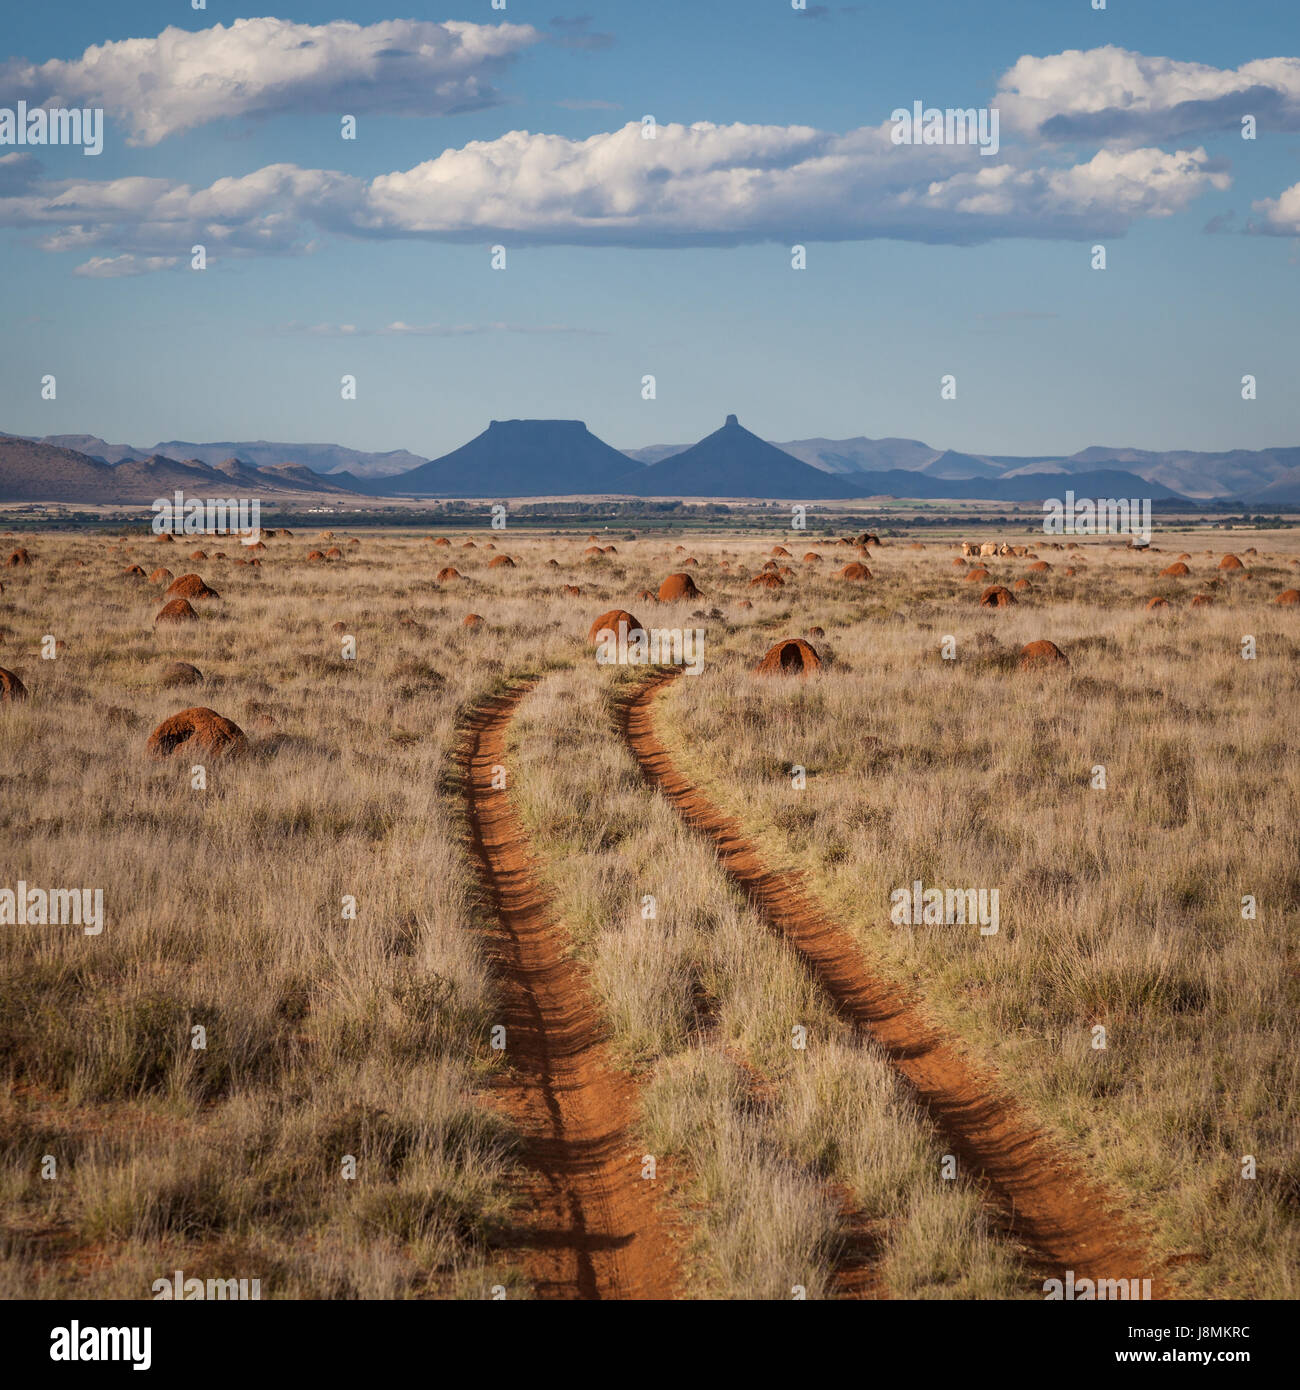 twin tracks lead towards the horizon through a grassy sheep grazing pasture towards two mountains punctuating the horizon, below fluffy white clouds Stock Photo